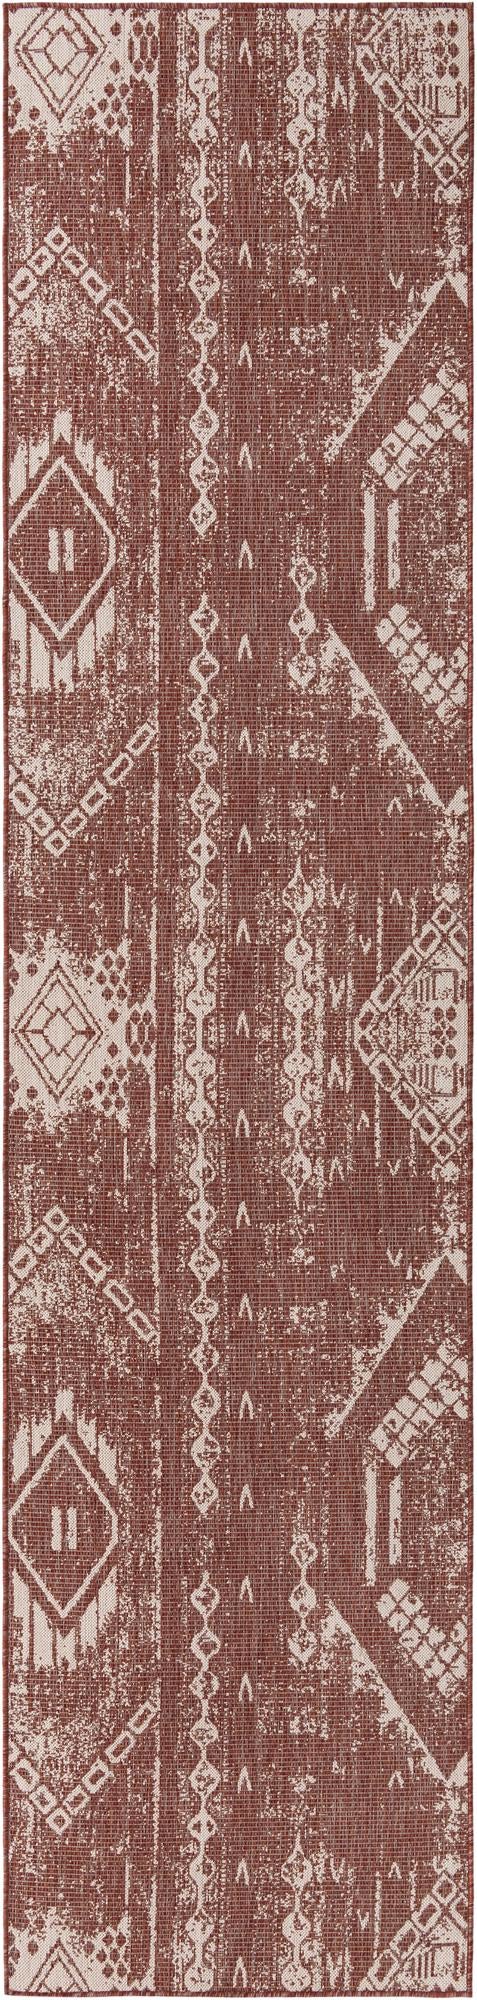 rugpal equivine contemporary area rug collection